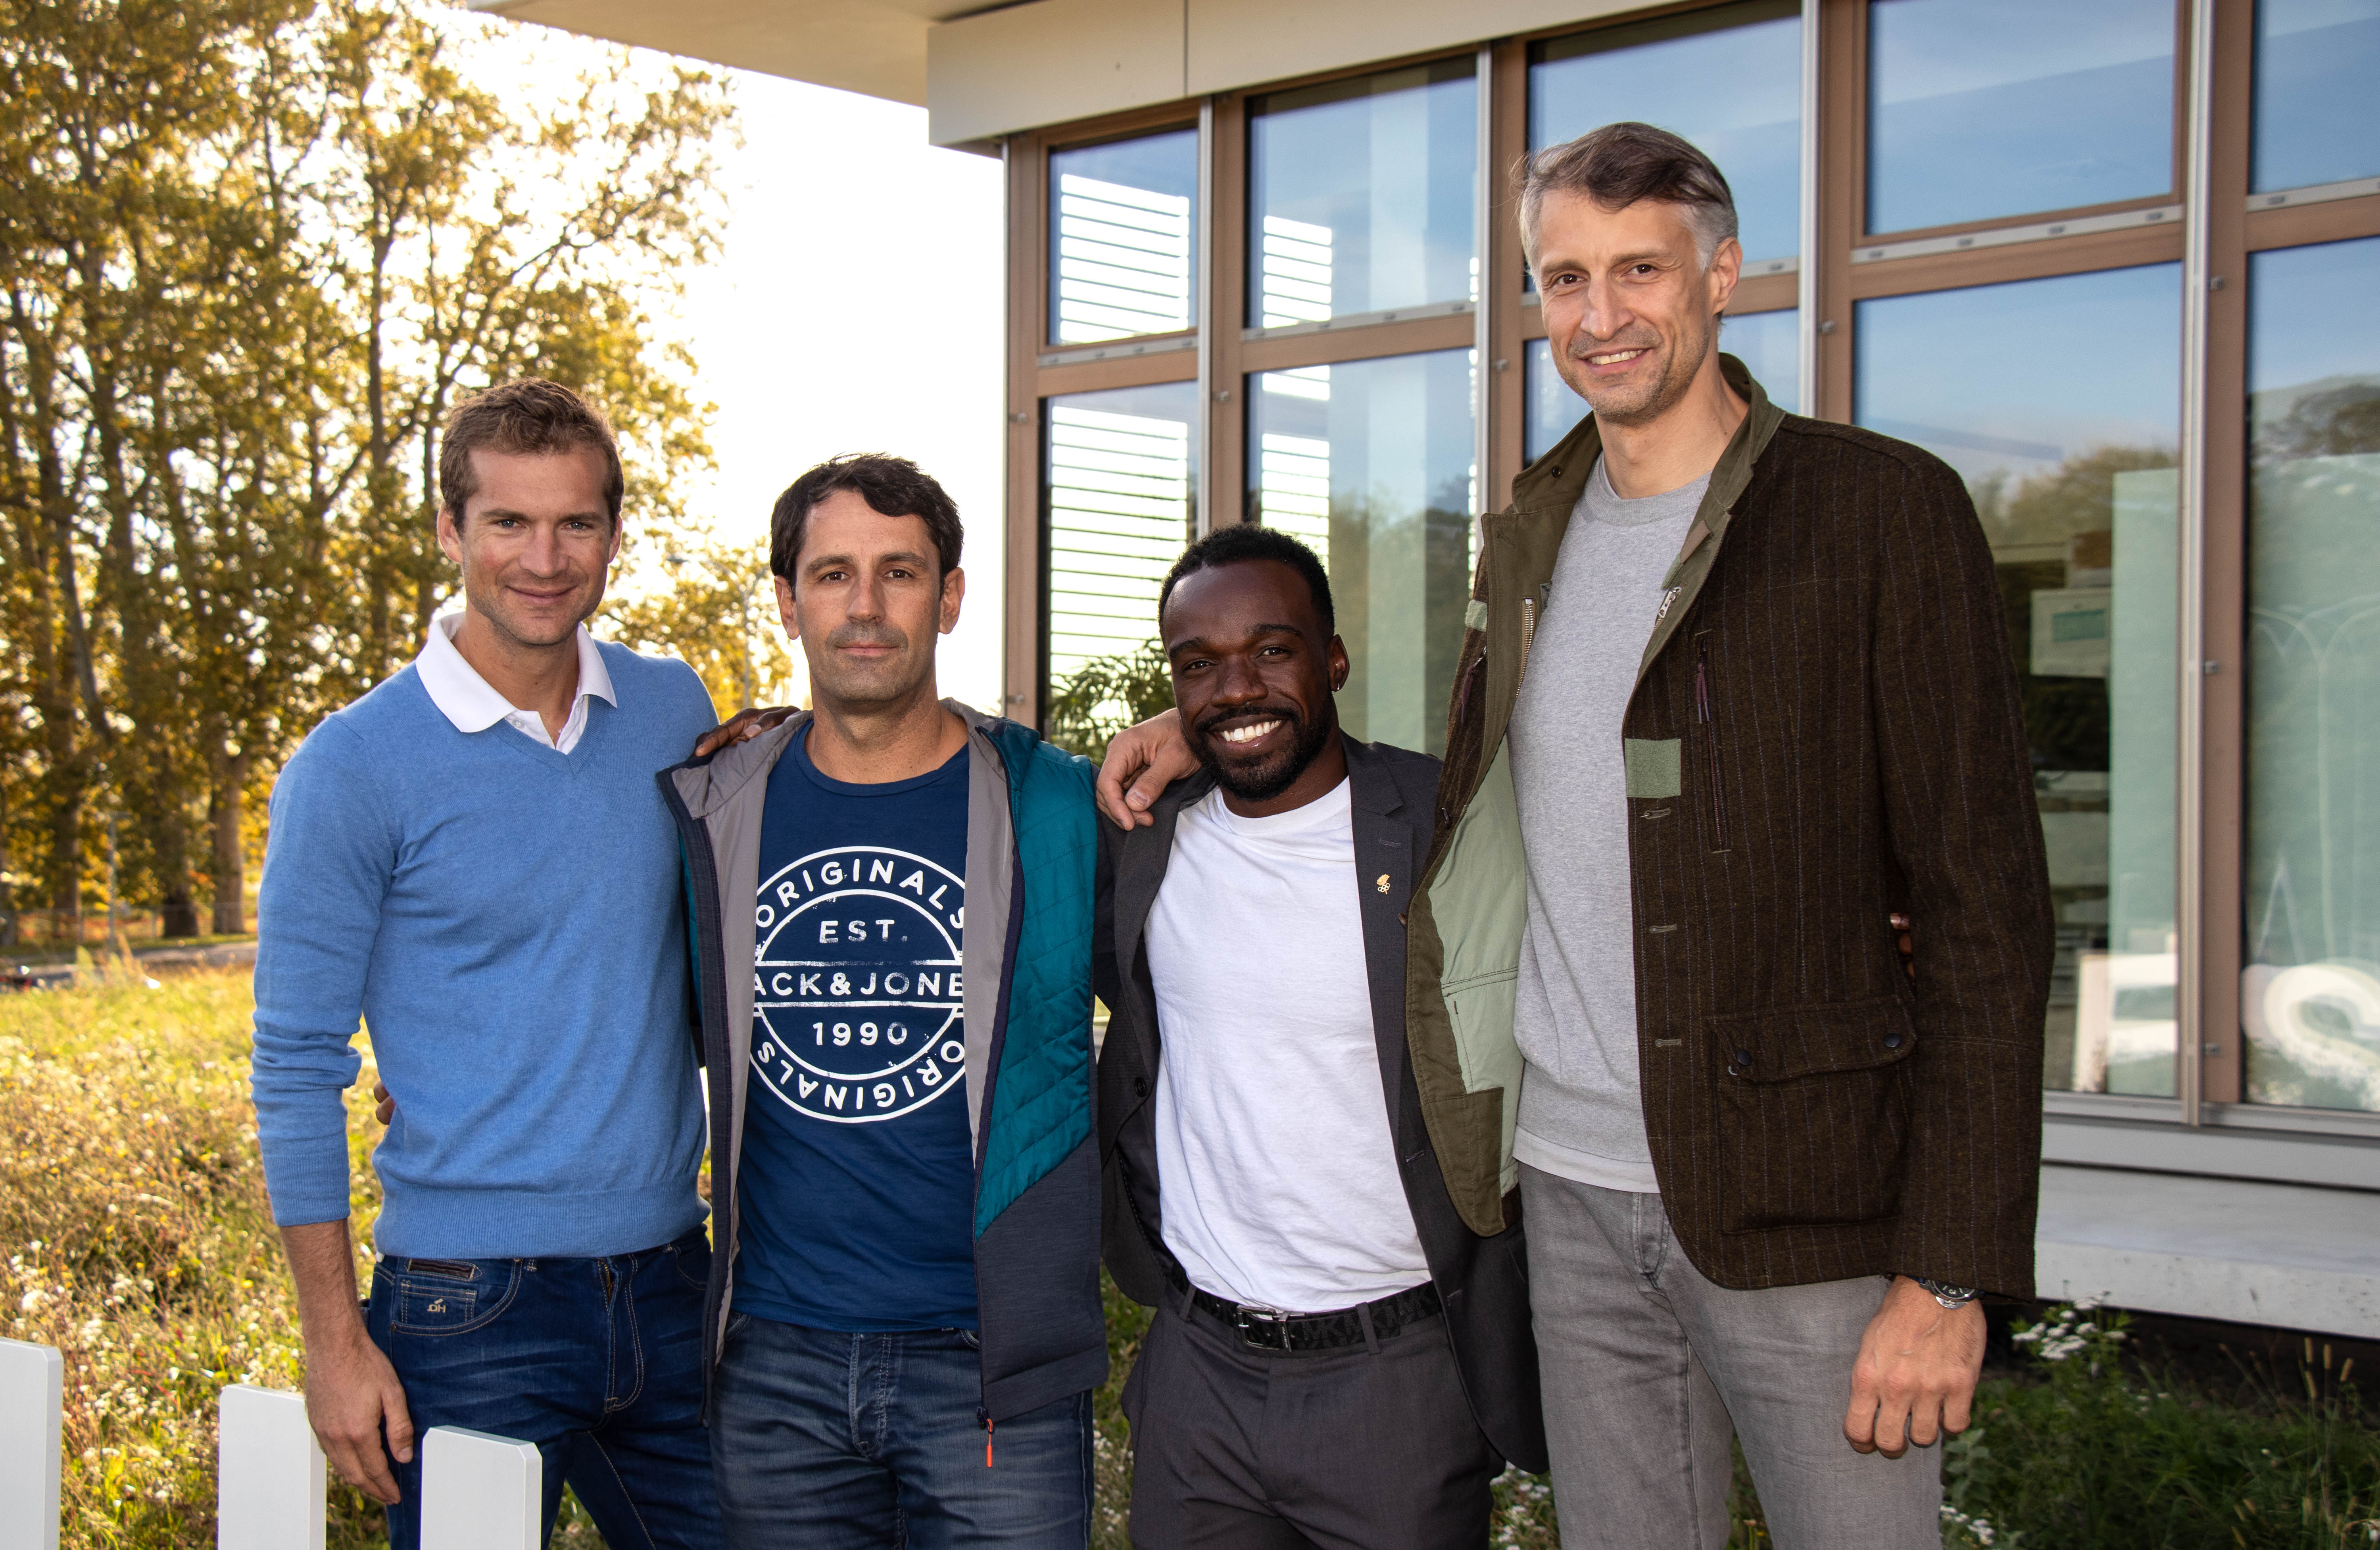 Marc Mundell, Santi Lopez, Mikel Thomas, and Ivan Miljkovic in front of AISTS